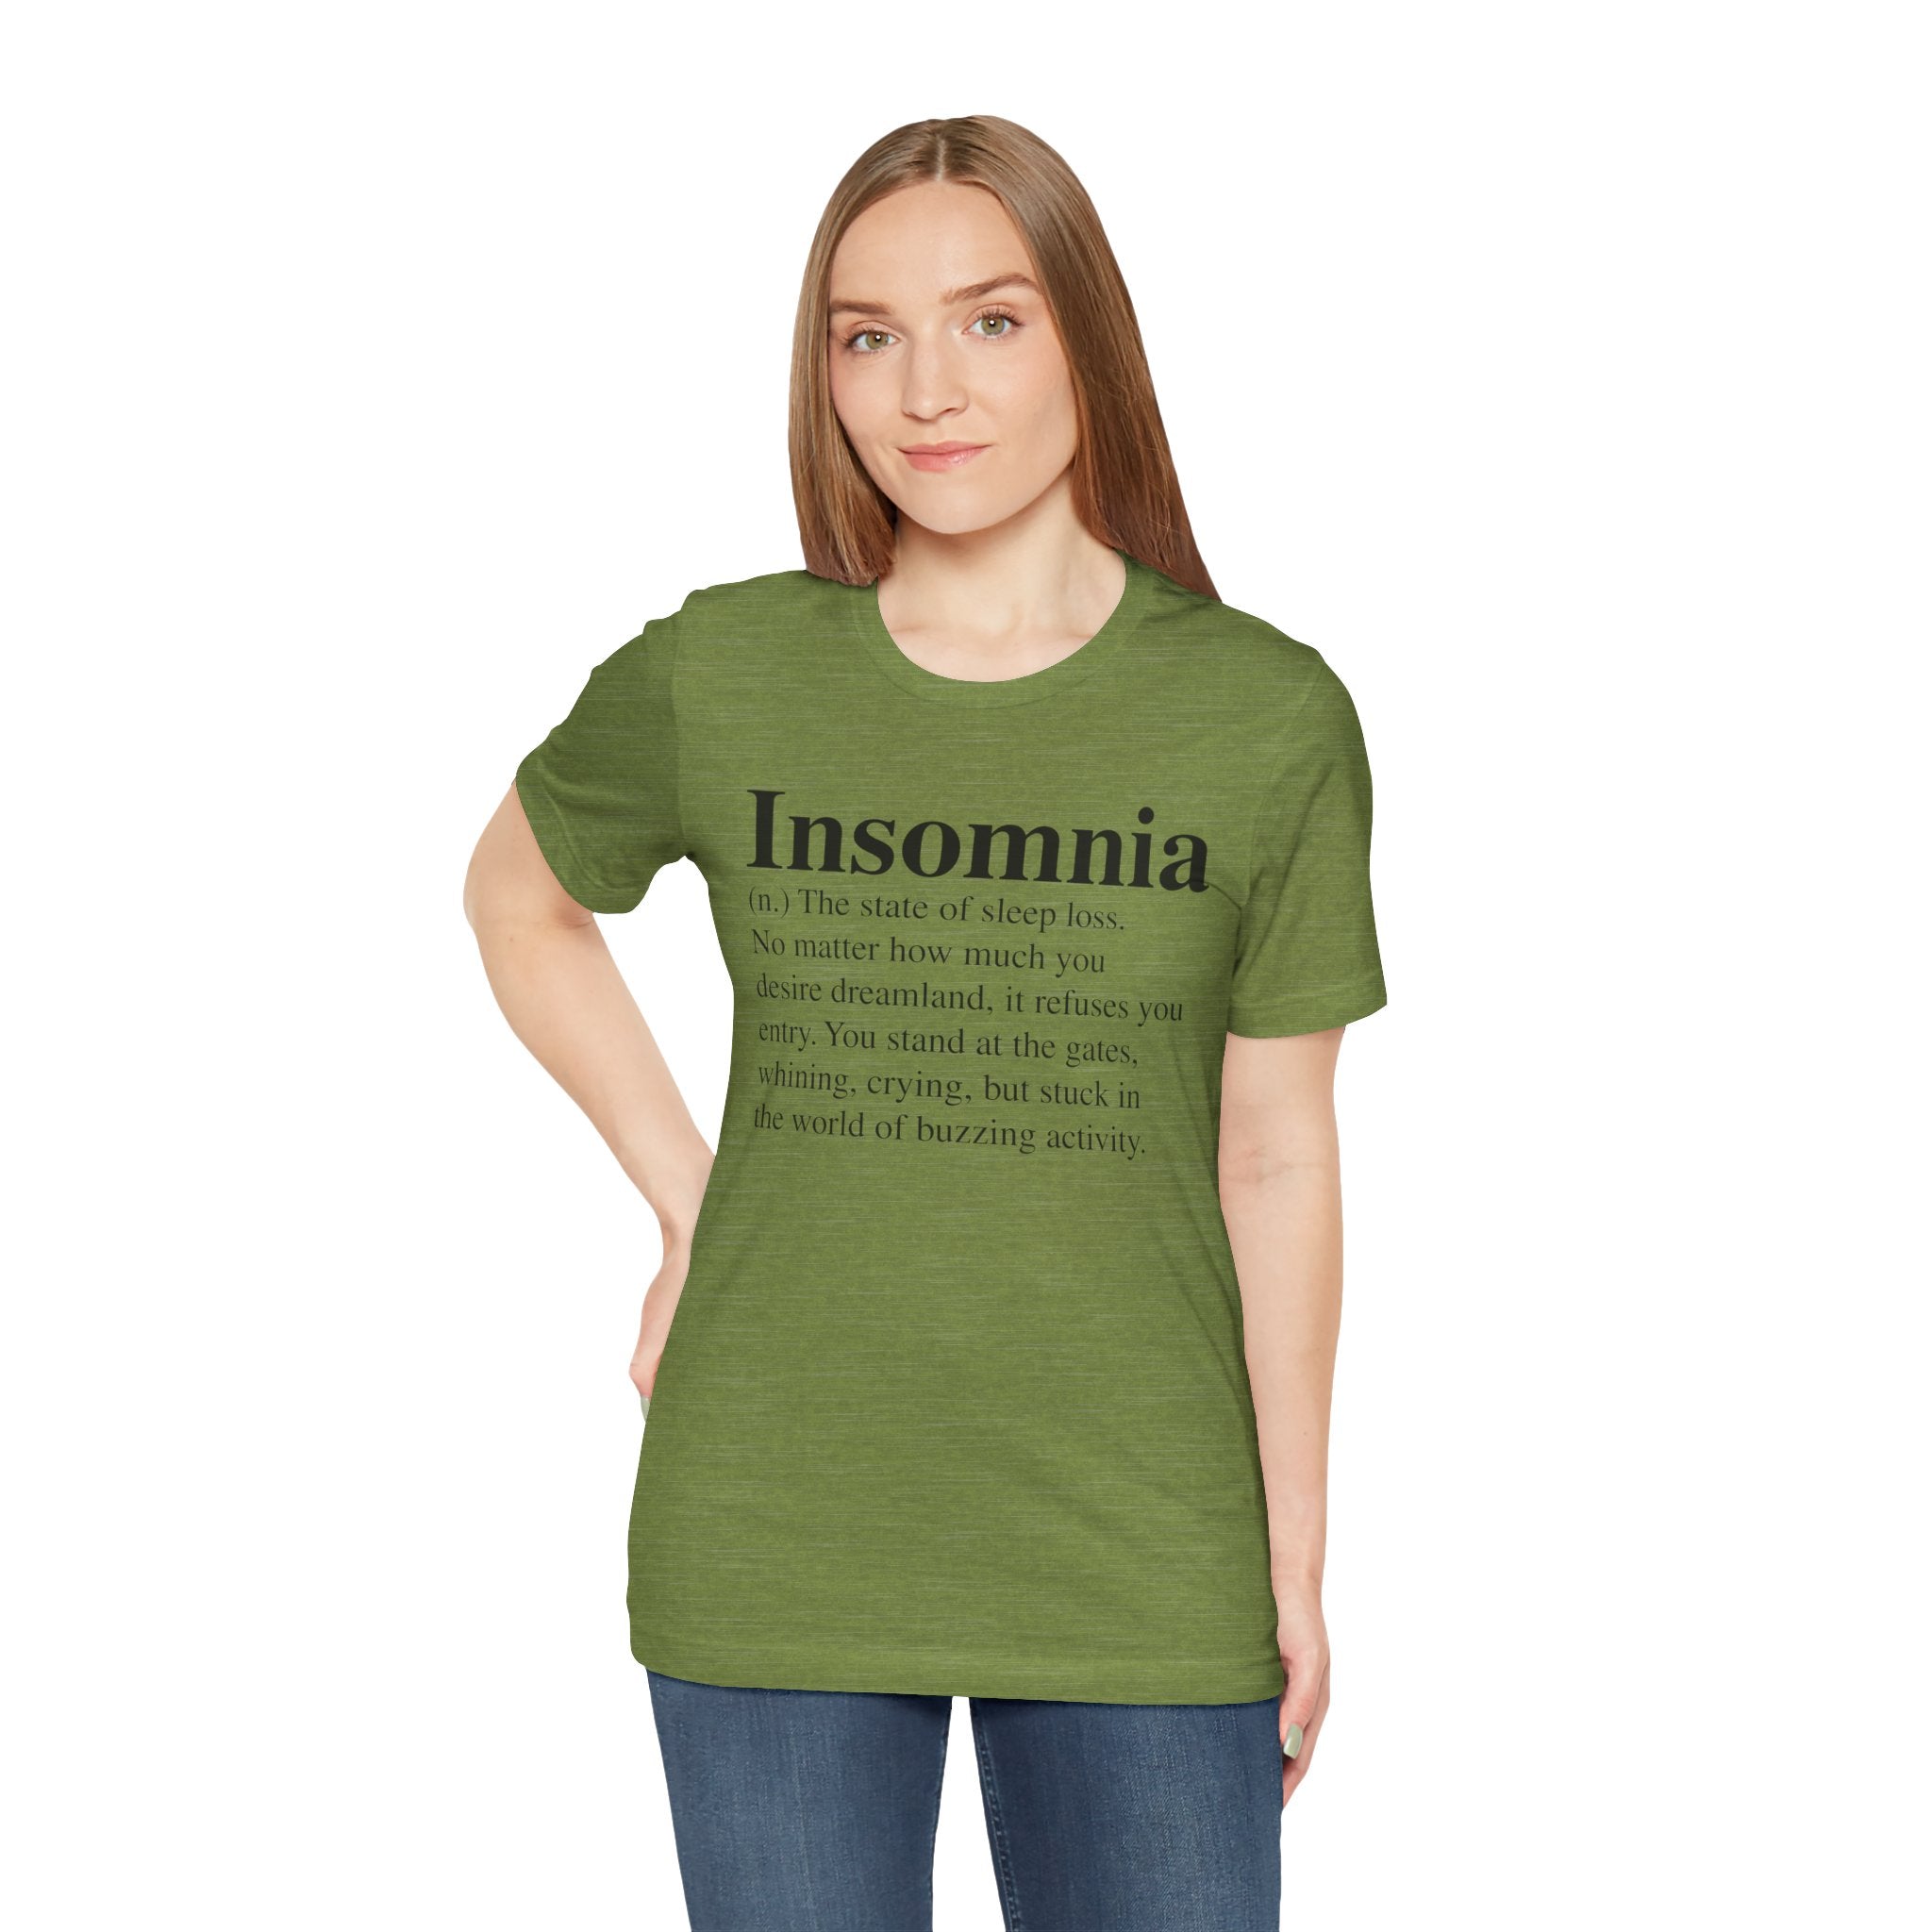 A woman with long brown hair wearing a green, soft cotton Insomnia T-Shirt with the word "insomnia" and a related text printed on it.